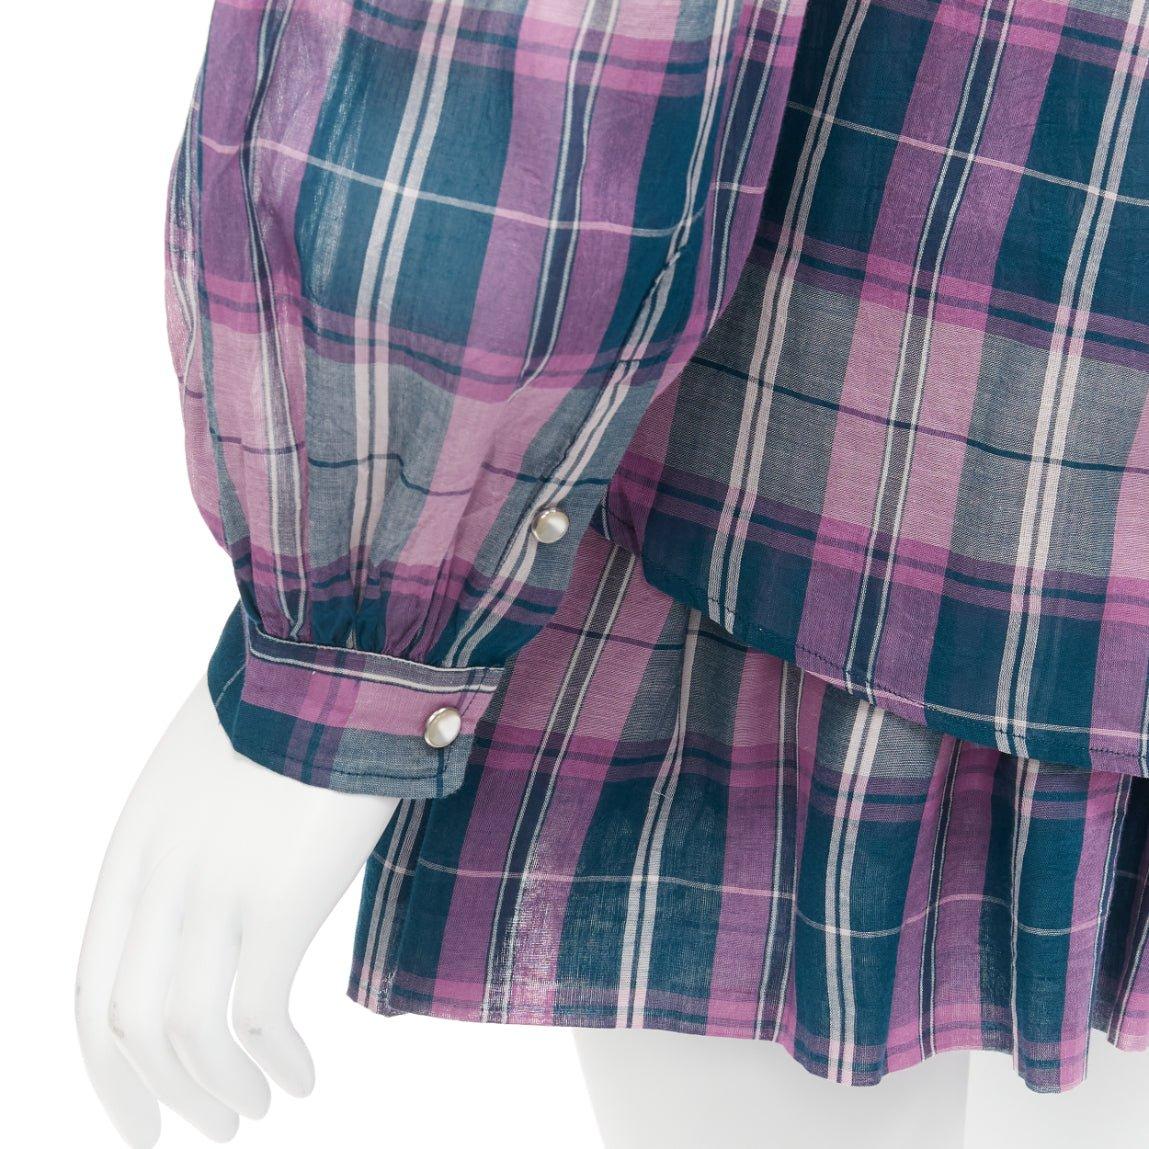 ISABEL MARANT ETOILE Bethany purple cotton check top FR34 XS shorts FR36 S set For Sale 6